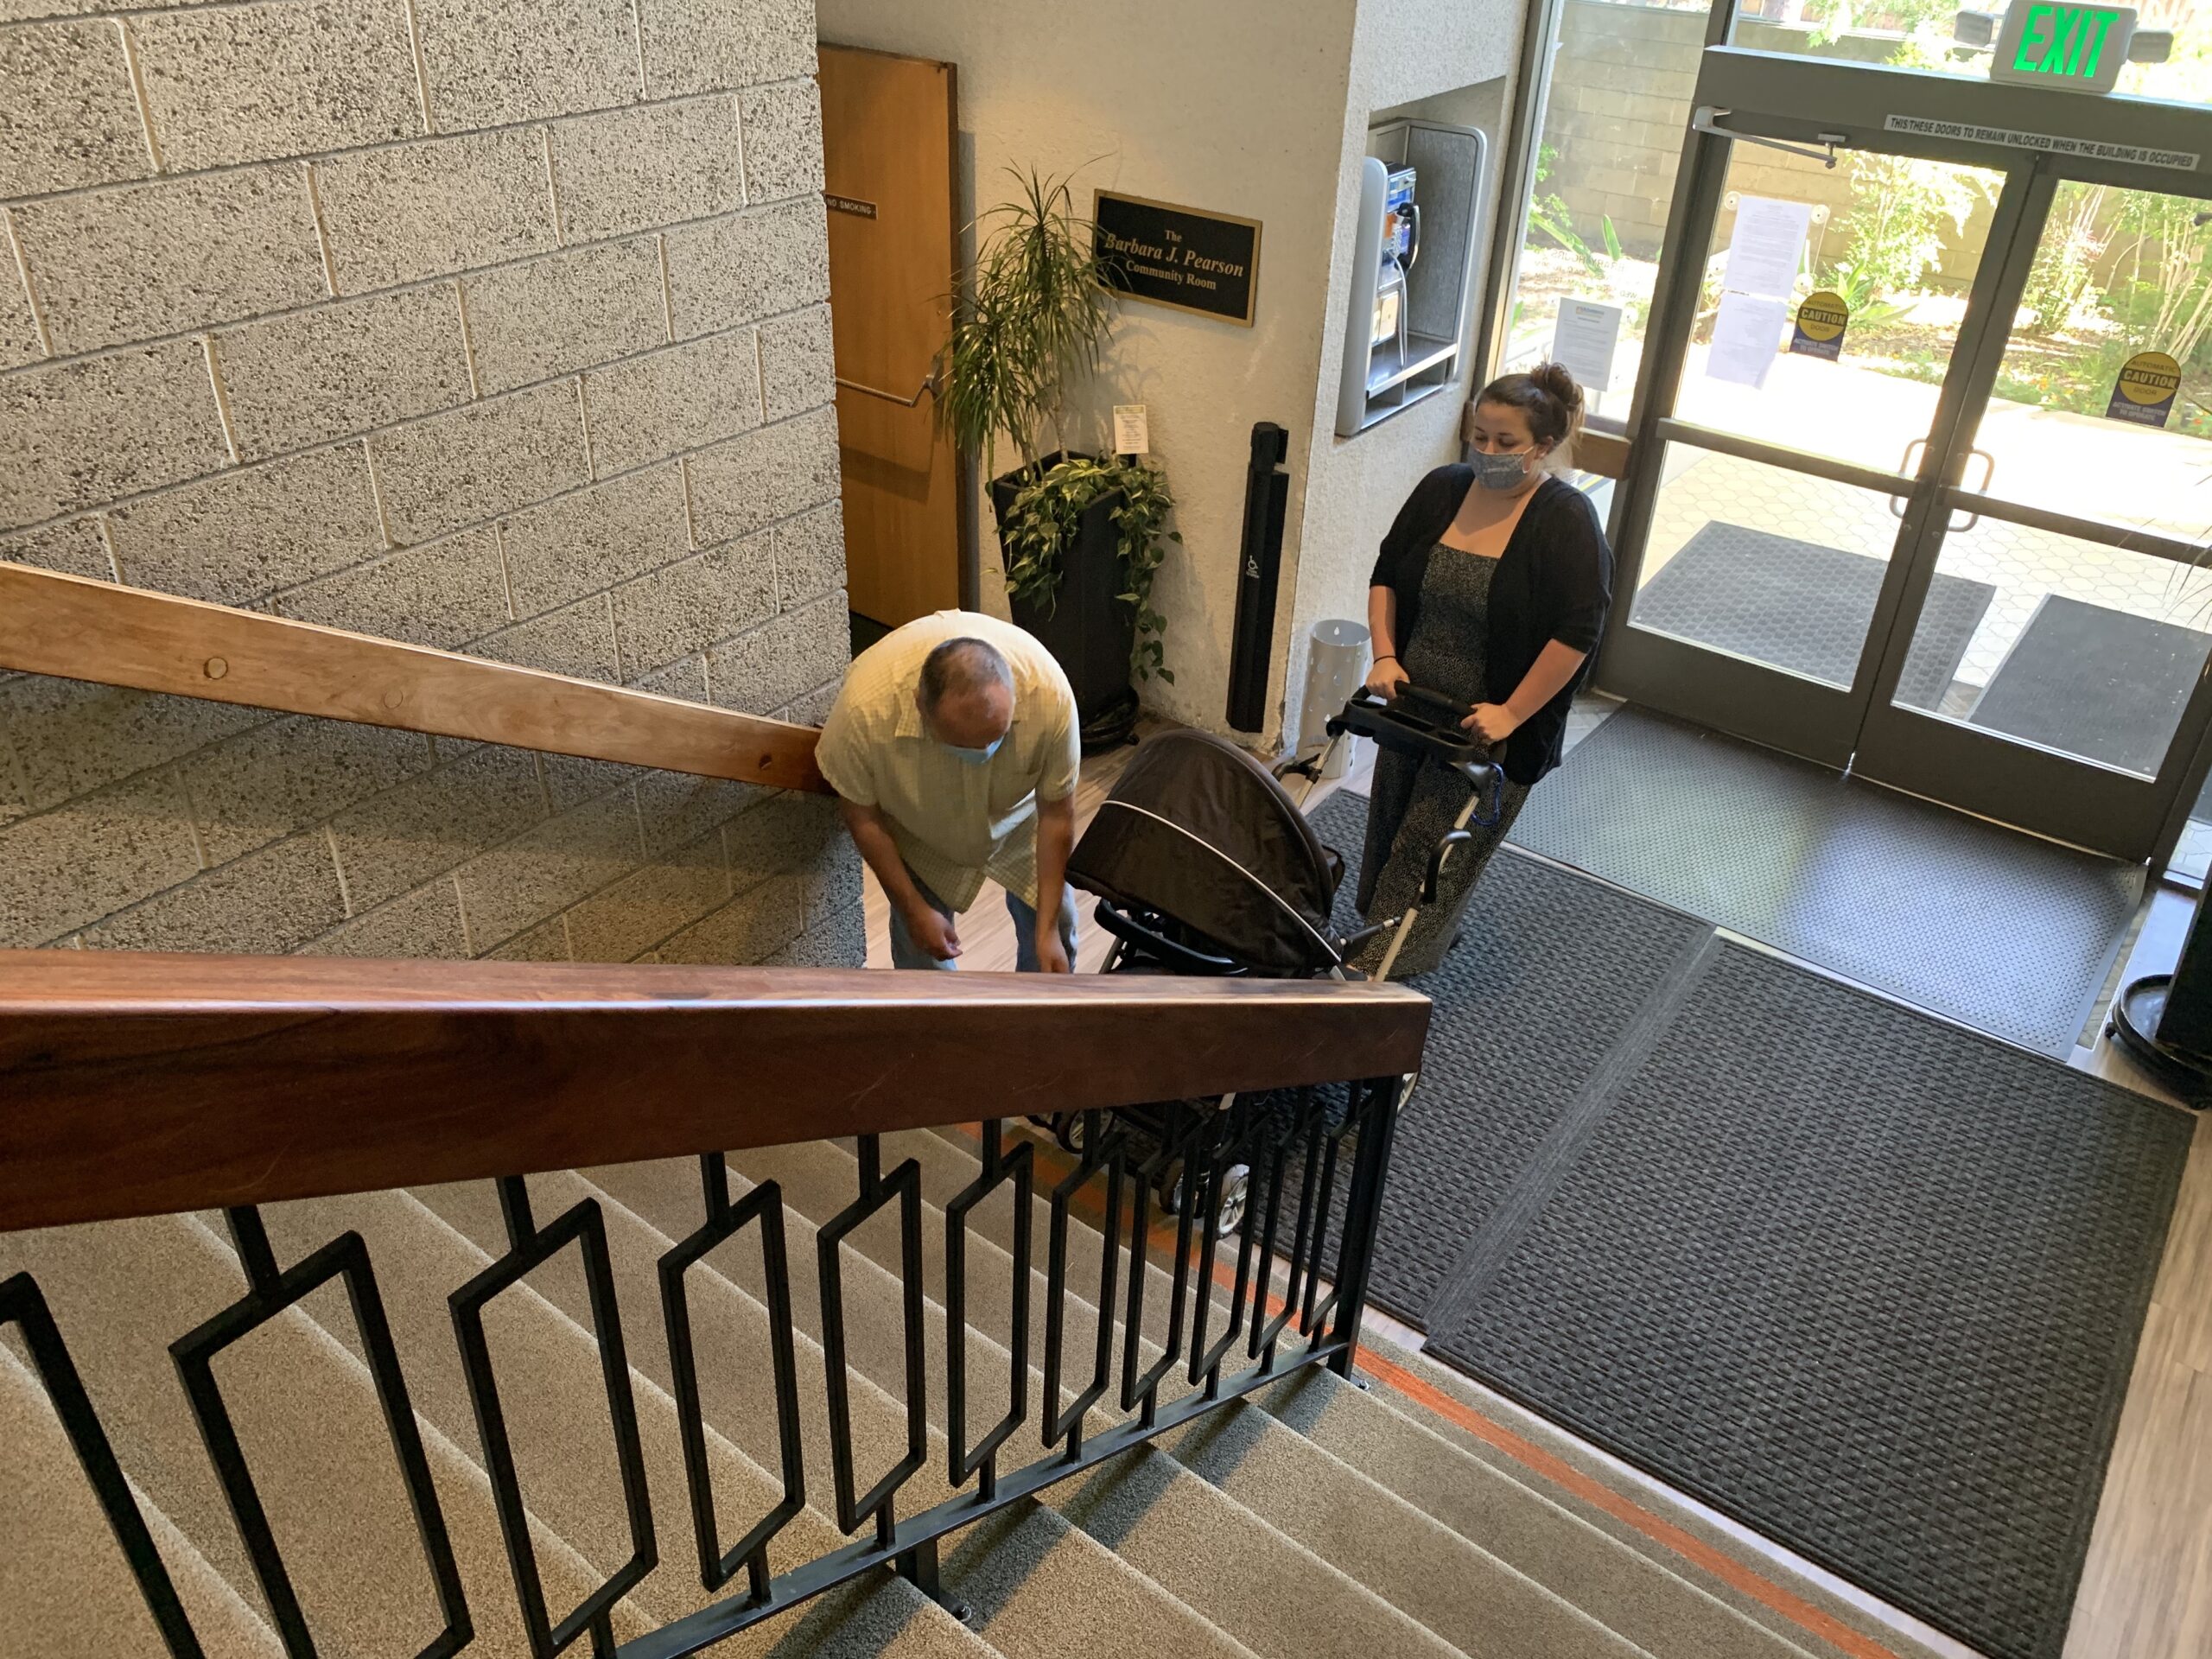 Woman needs assistance to carry stroller upstairs to get into library